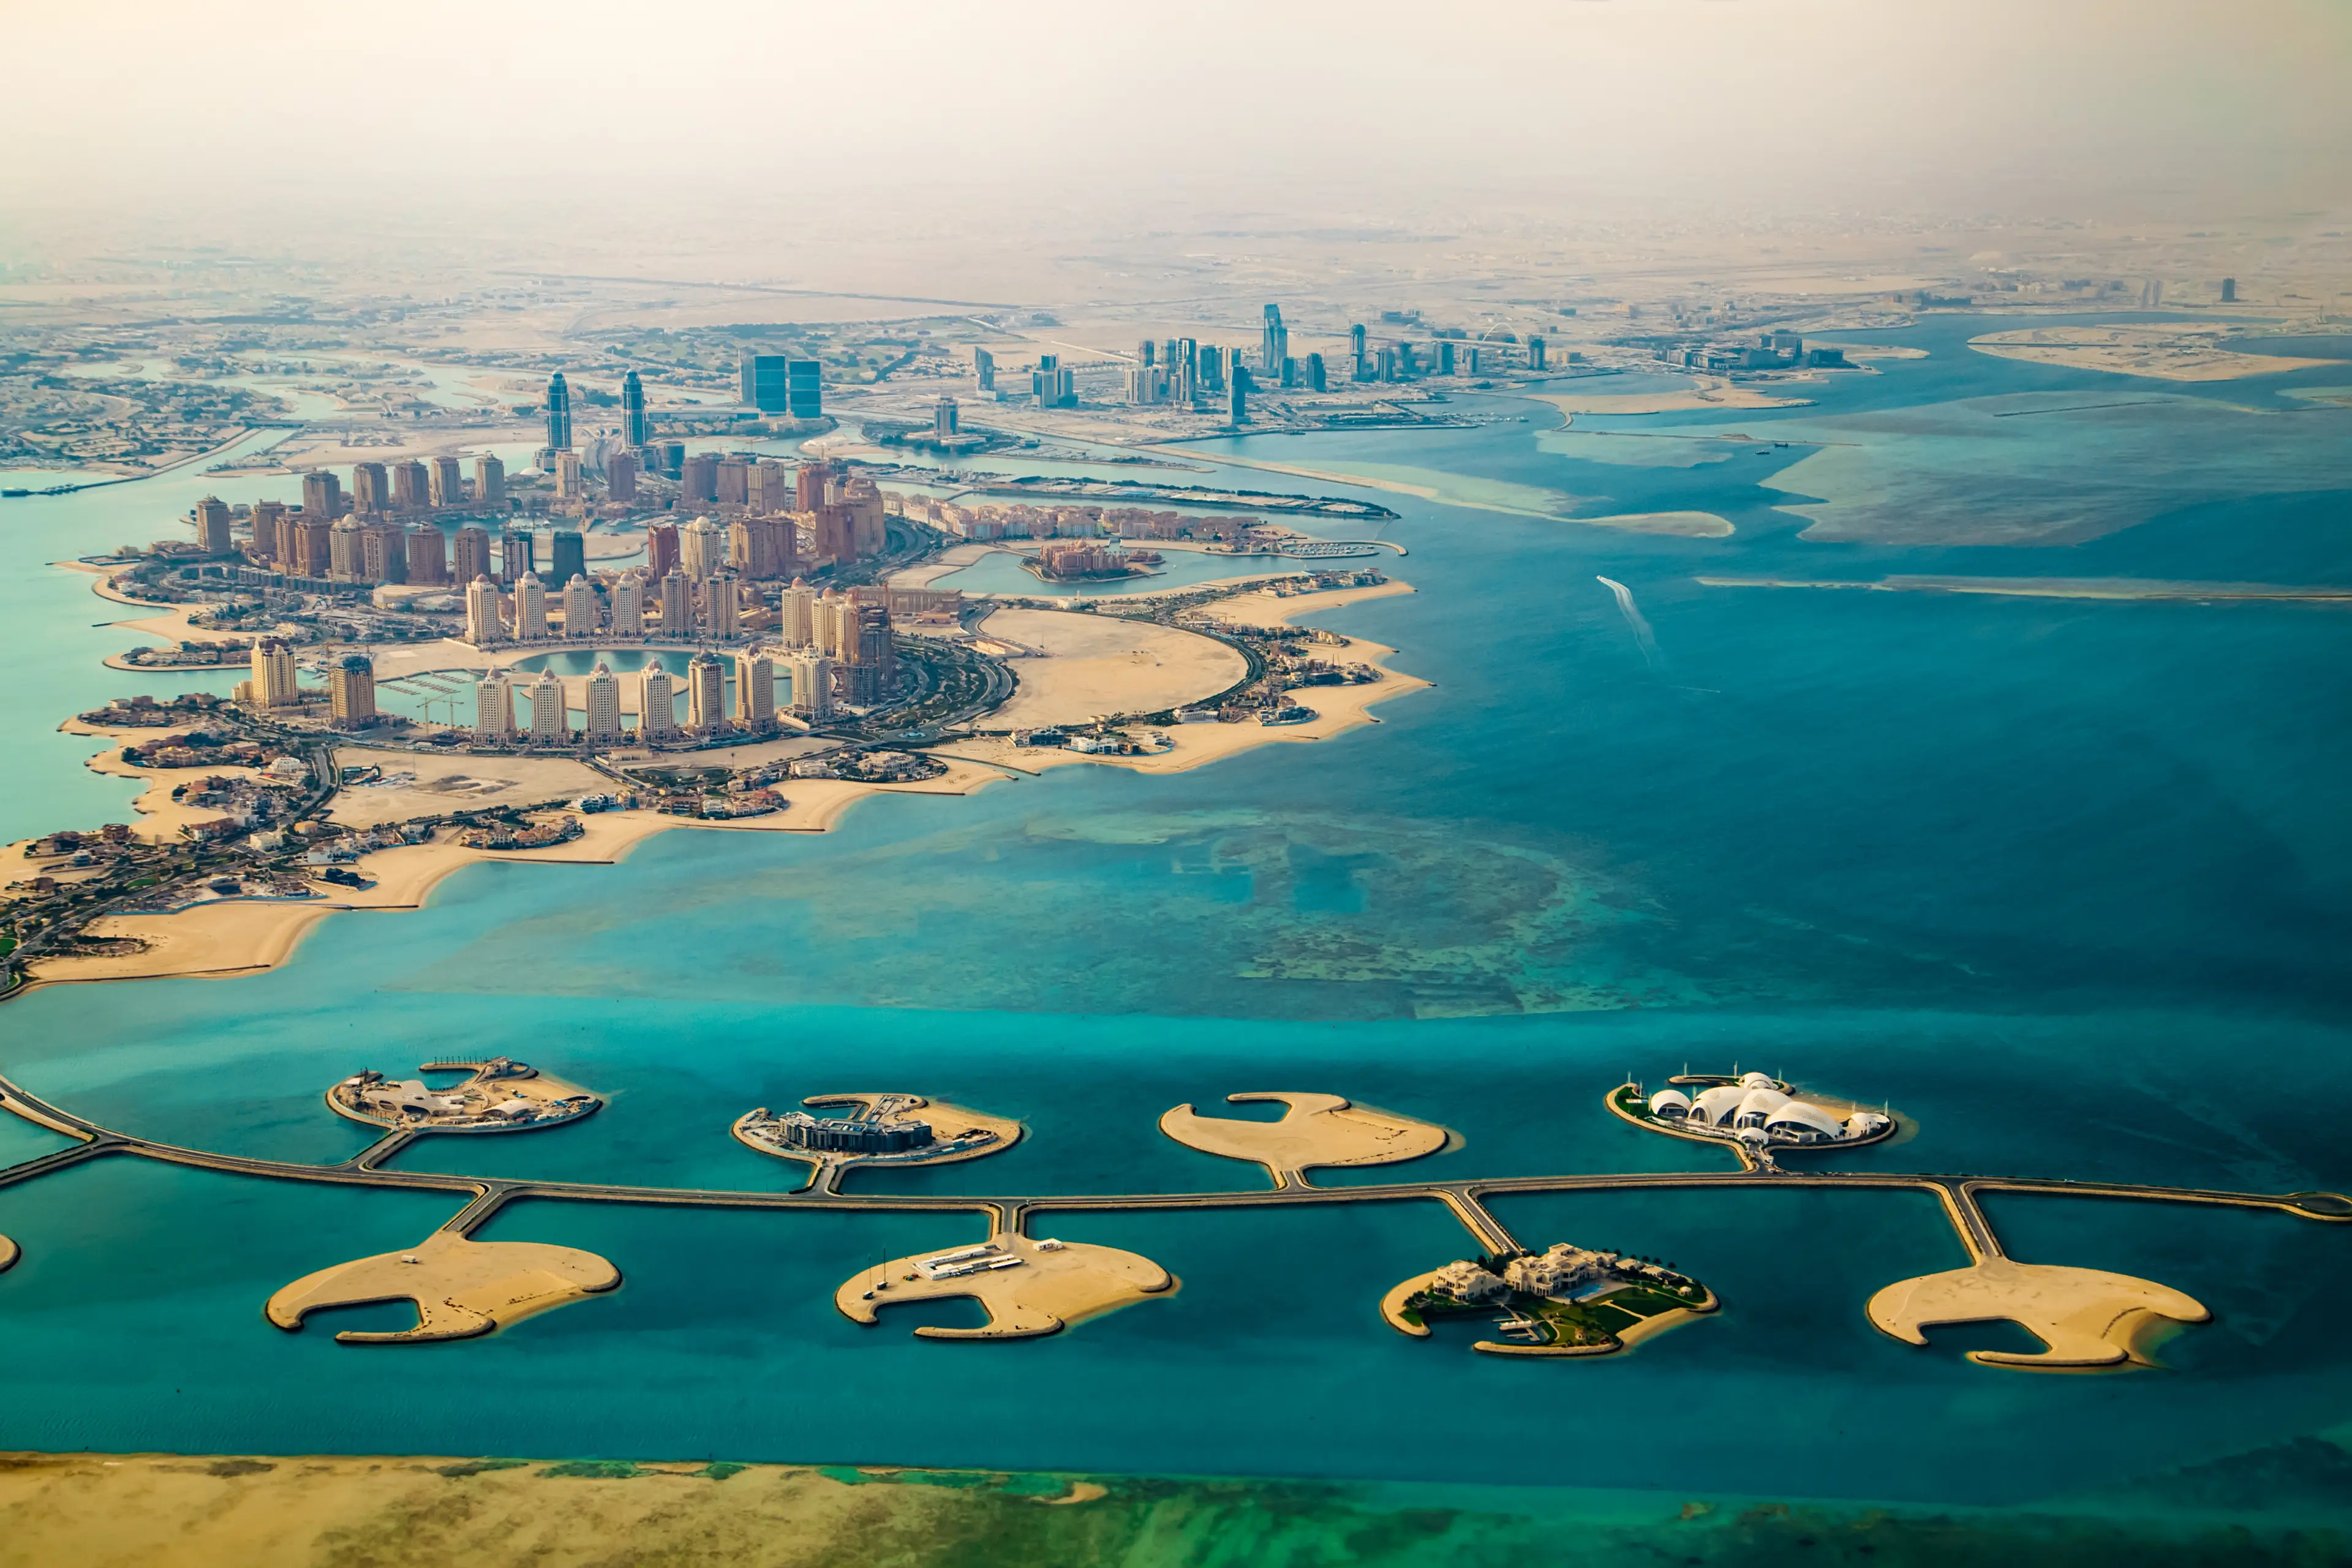 4-Day Local Food, Wine and Nightlife Family Adventure in Doha, Qatar